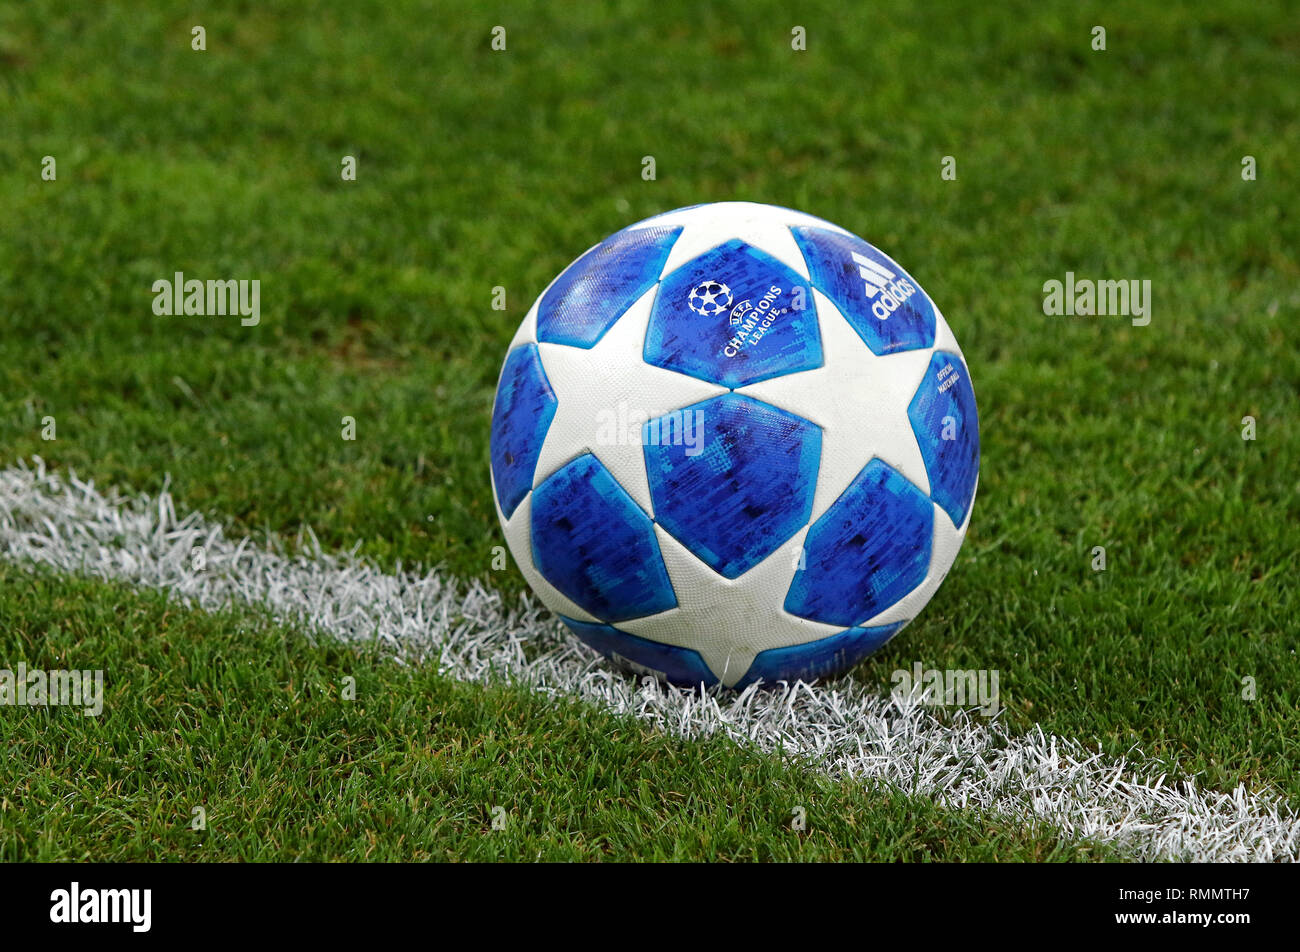 KYIV, UKRAINE - AUGUST 28, 2018: Official UEFA Champions League 2018/19  season match ball on the grass during the UEFA Champions League play-off  game Stock Photo - Alamy